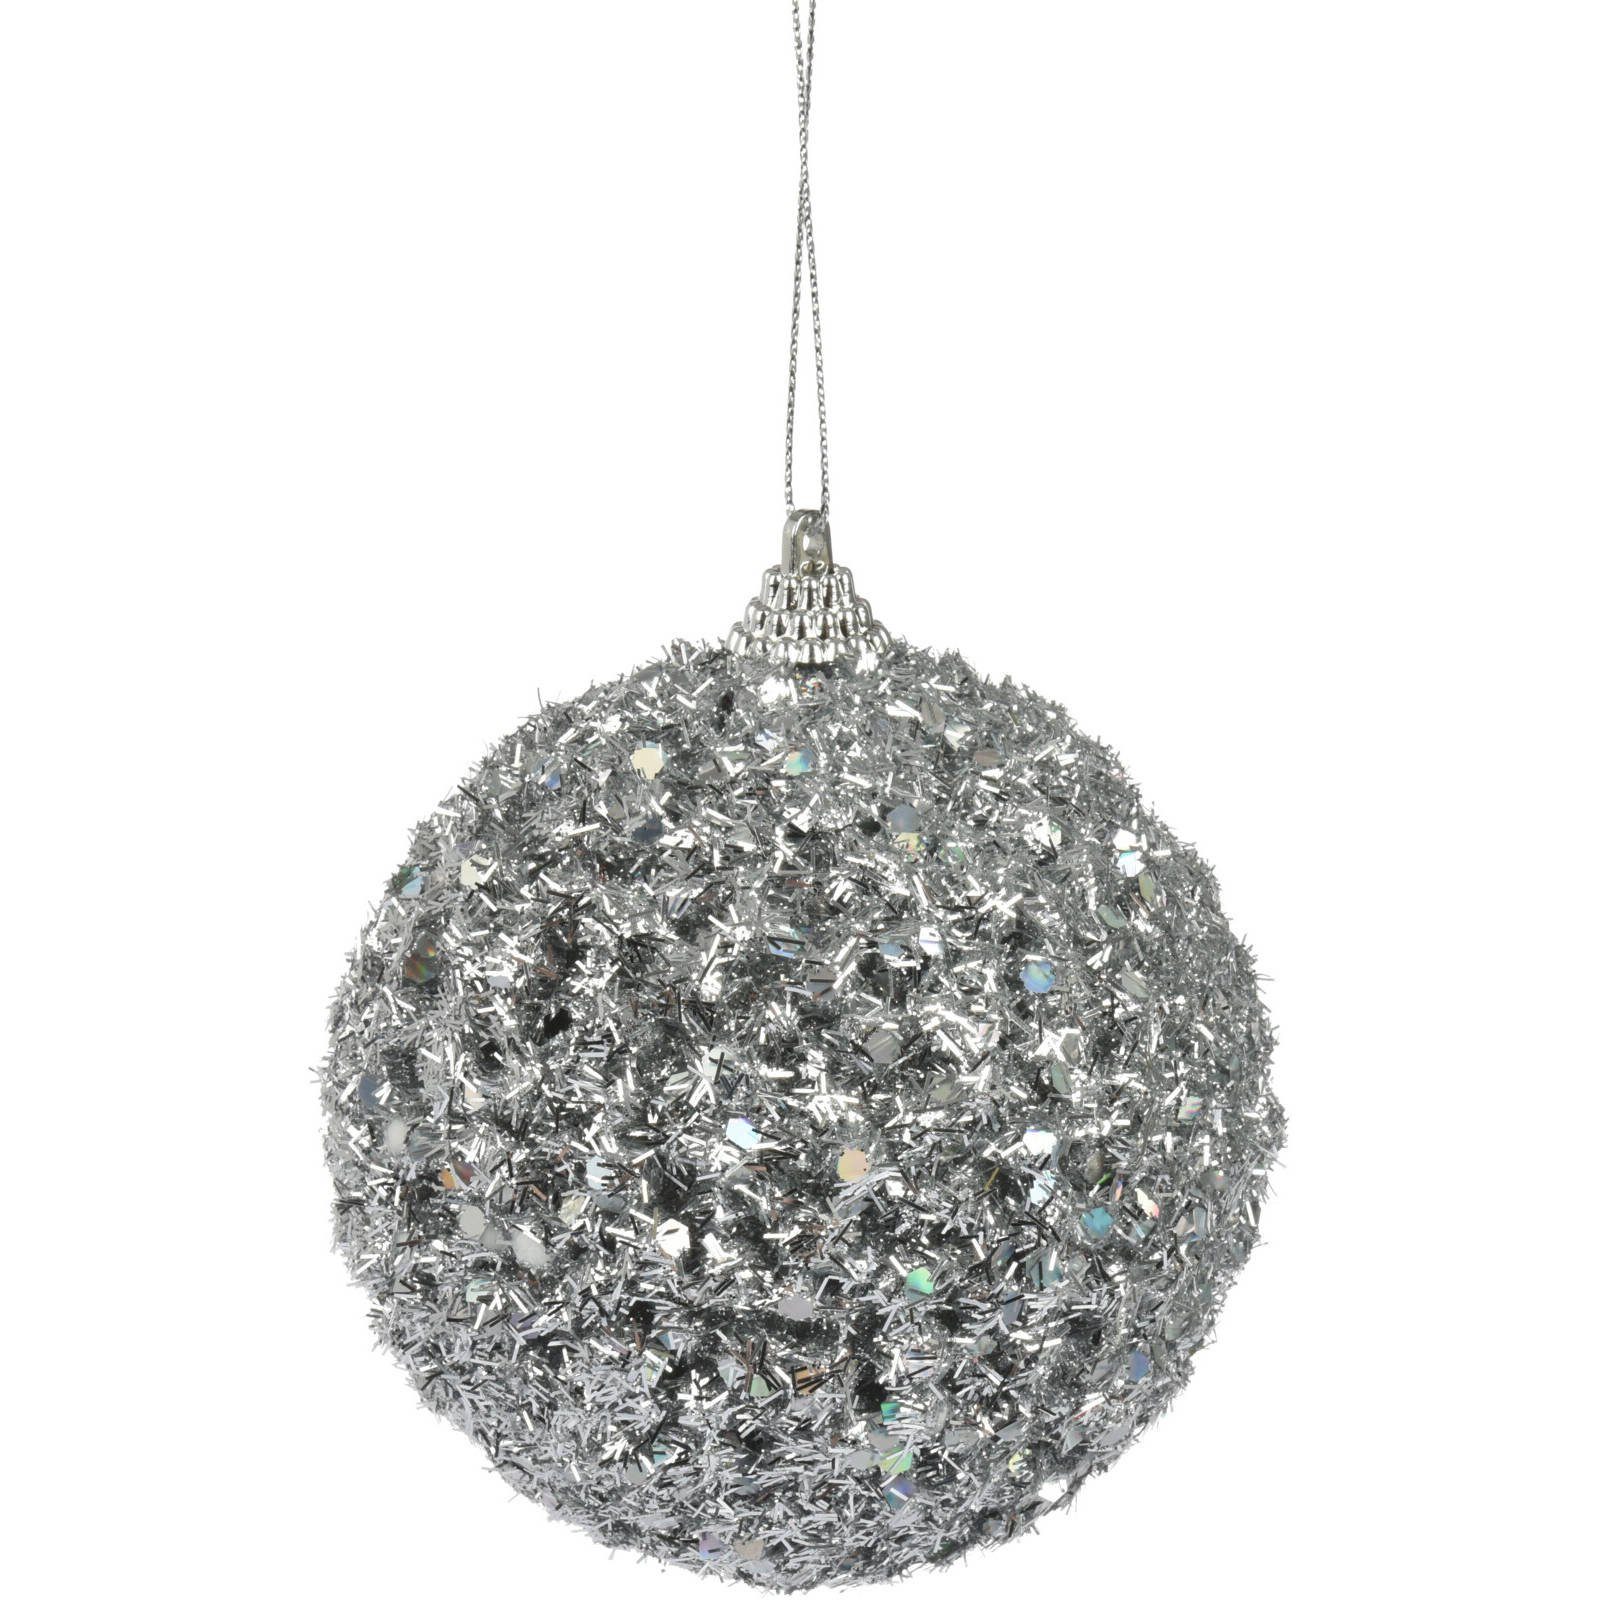 Home & styling collection Weihnachtsbaumkugel Silber